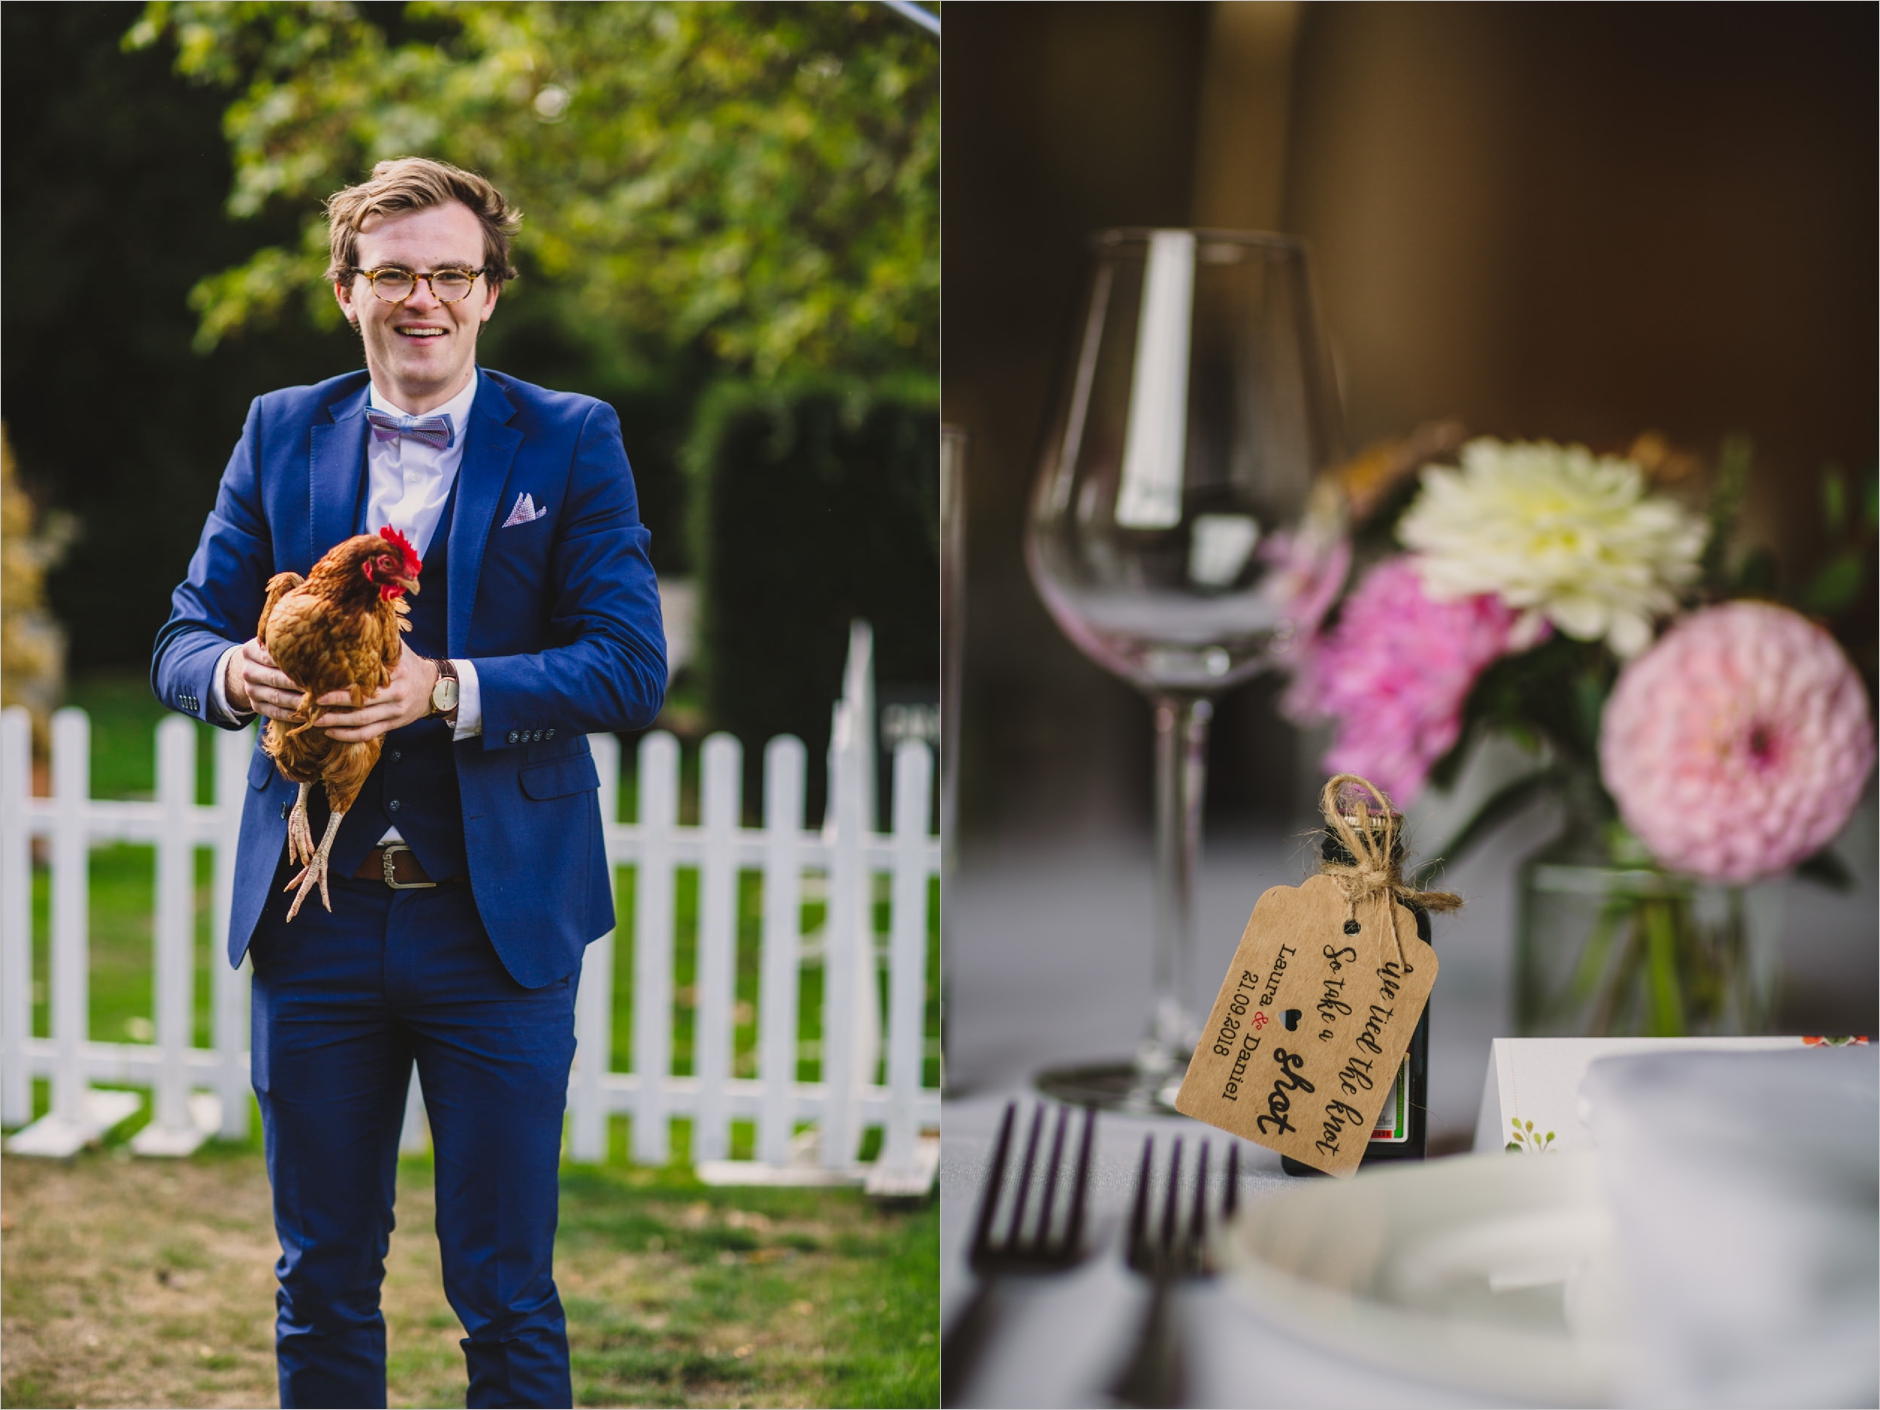 wedding guest holding a chicken and wedding table decor